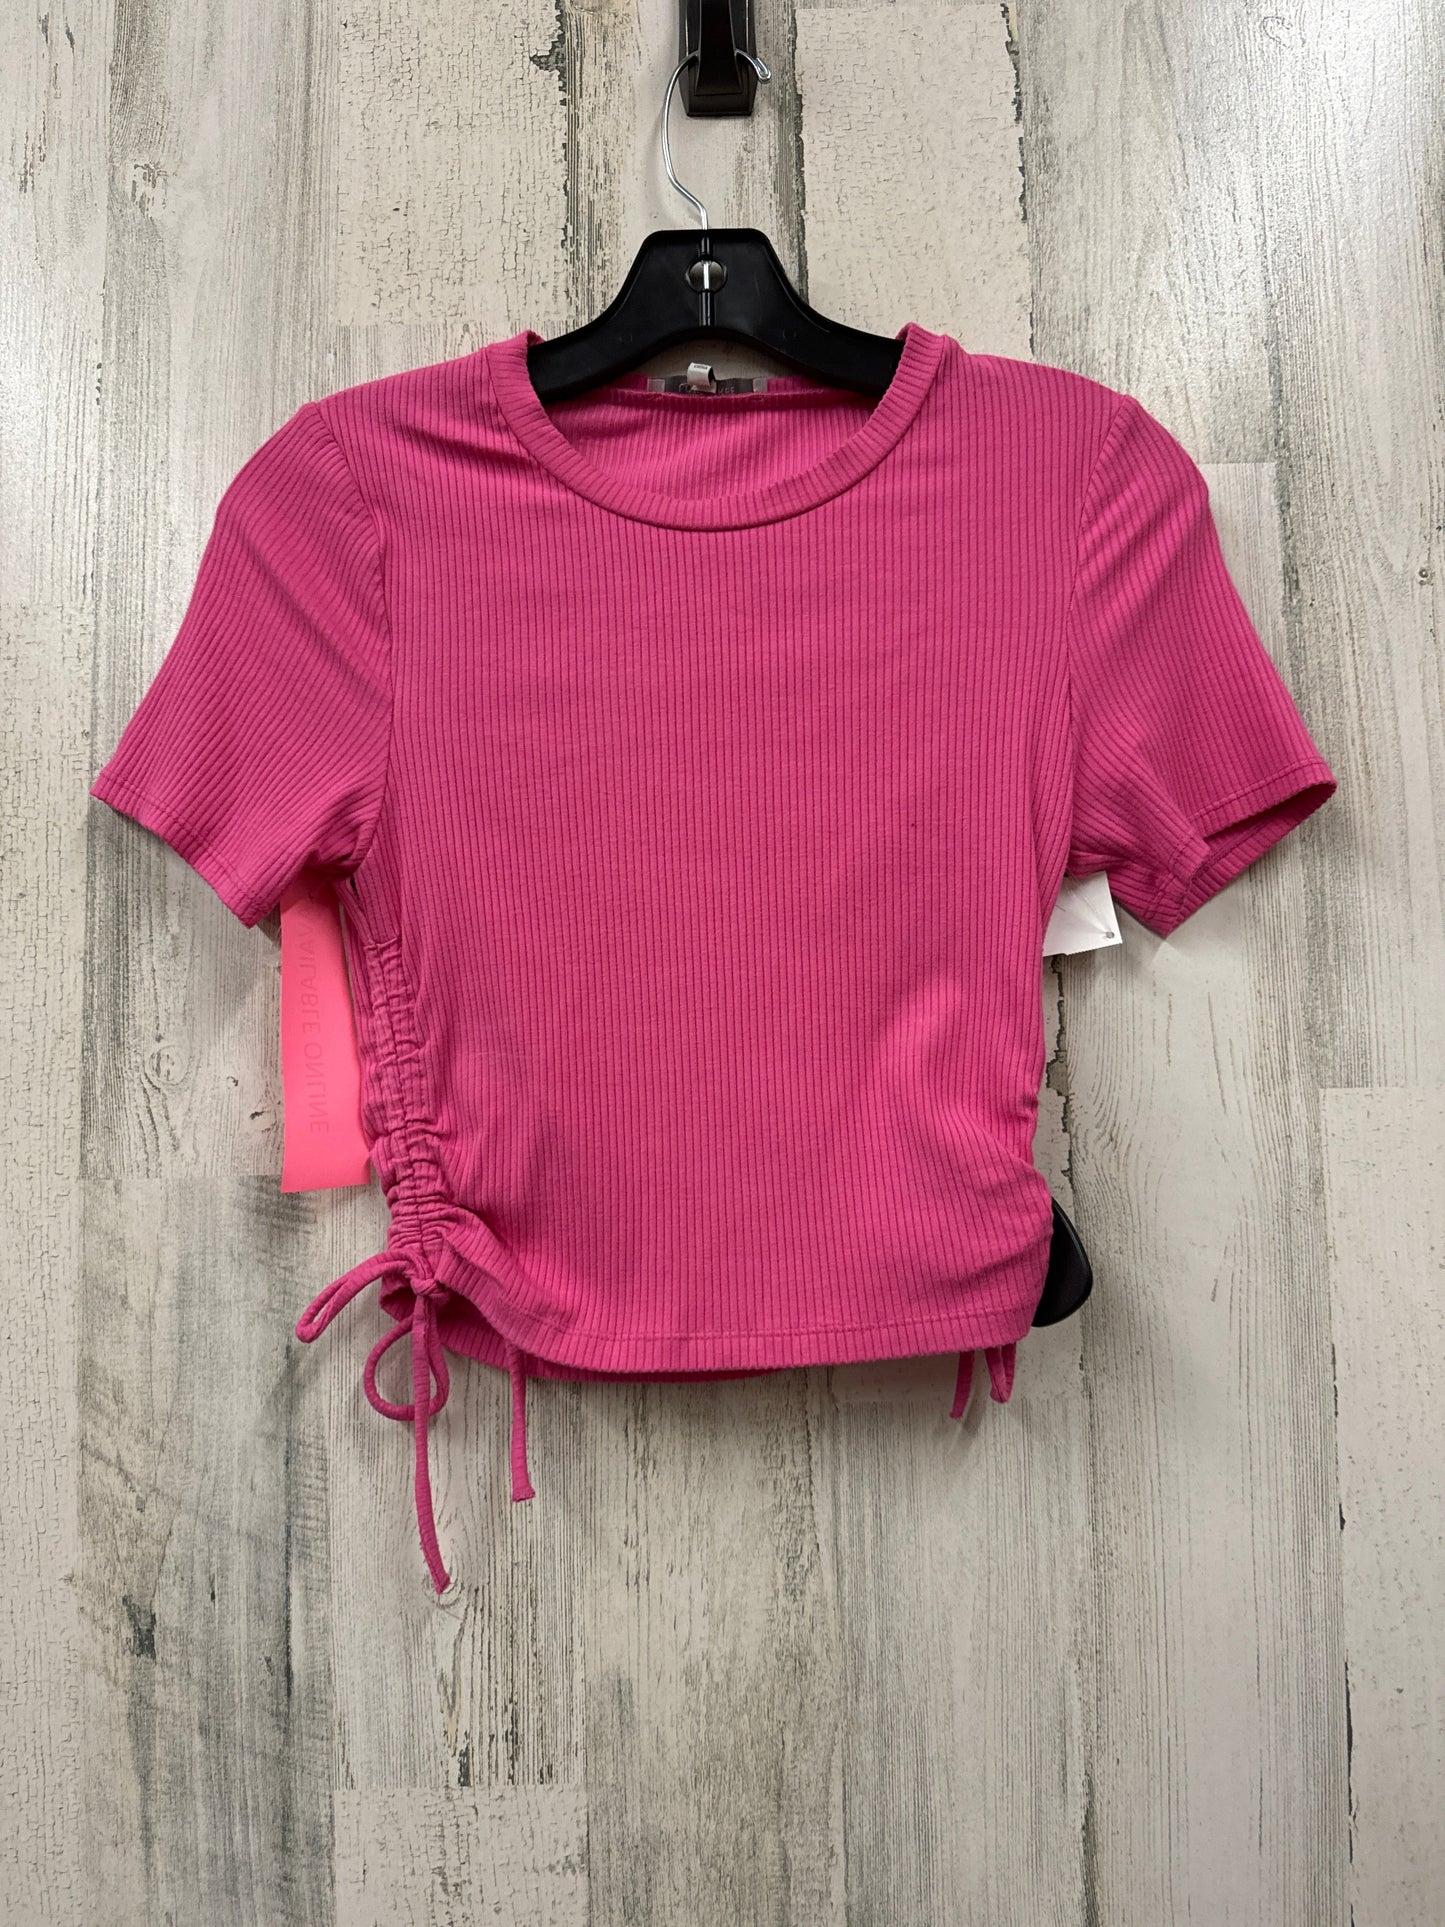 Pink Top Short Sleeve Love Tree, Size S